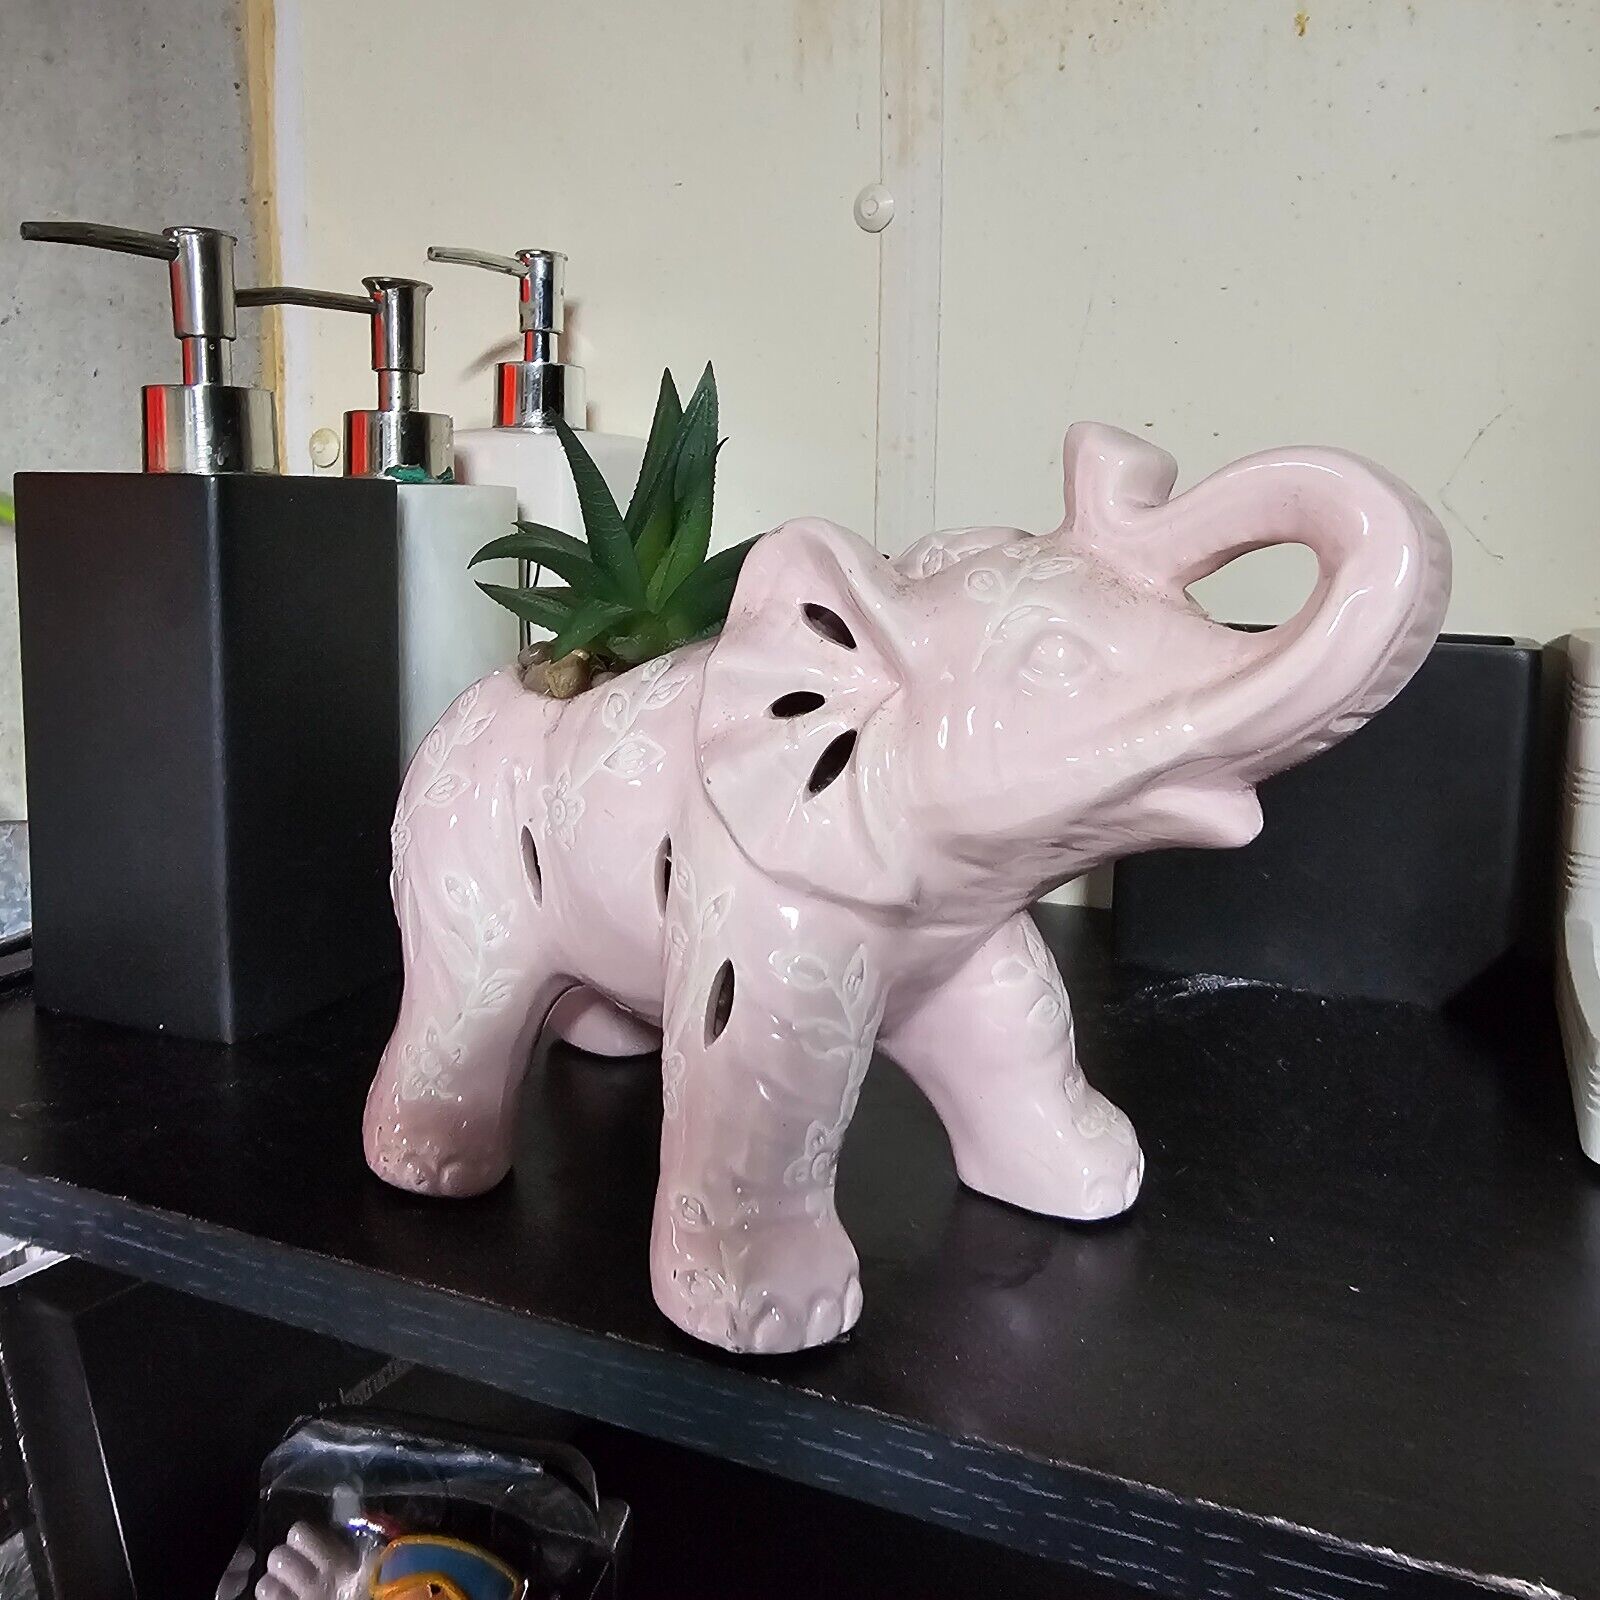 Vintage Pink Ceramic Standing Elephant Planter with Trunk Up